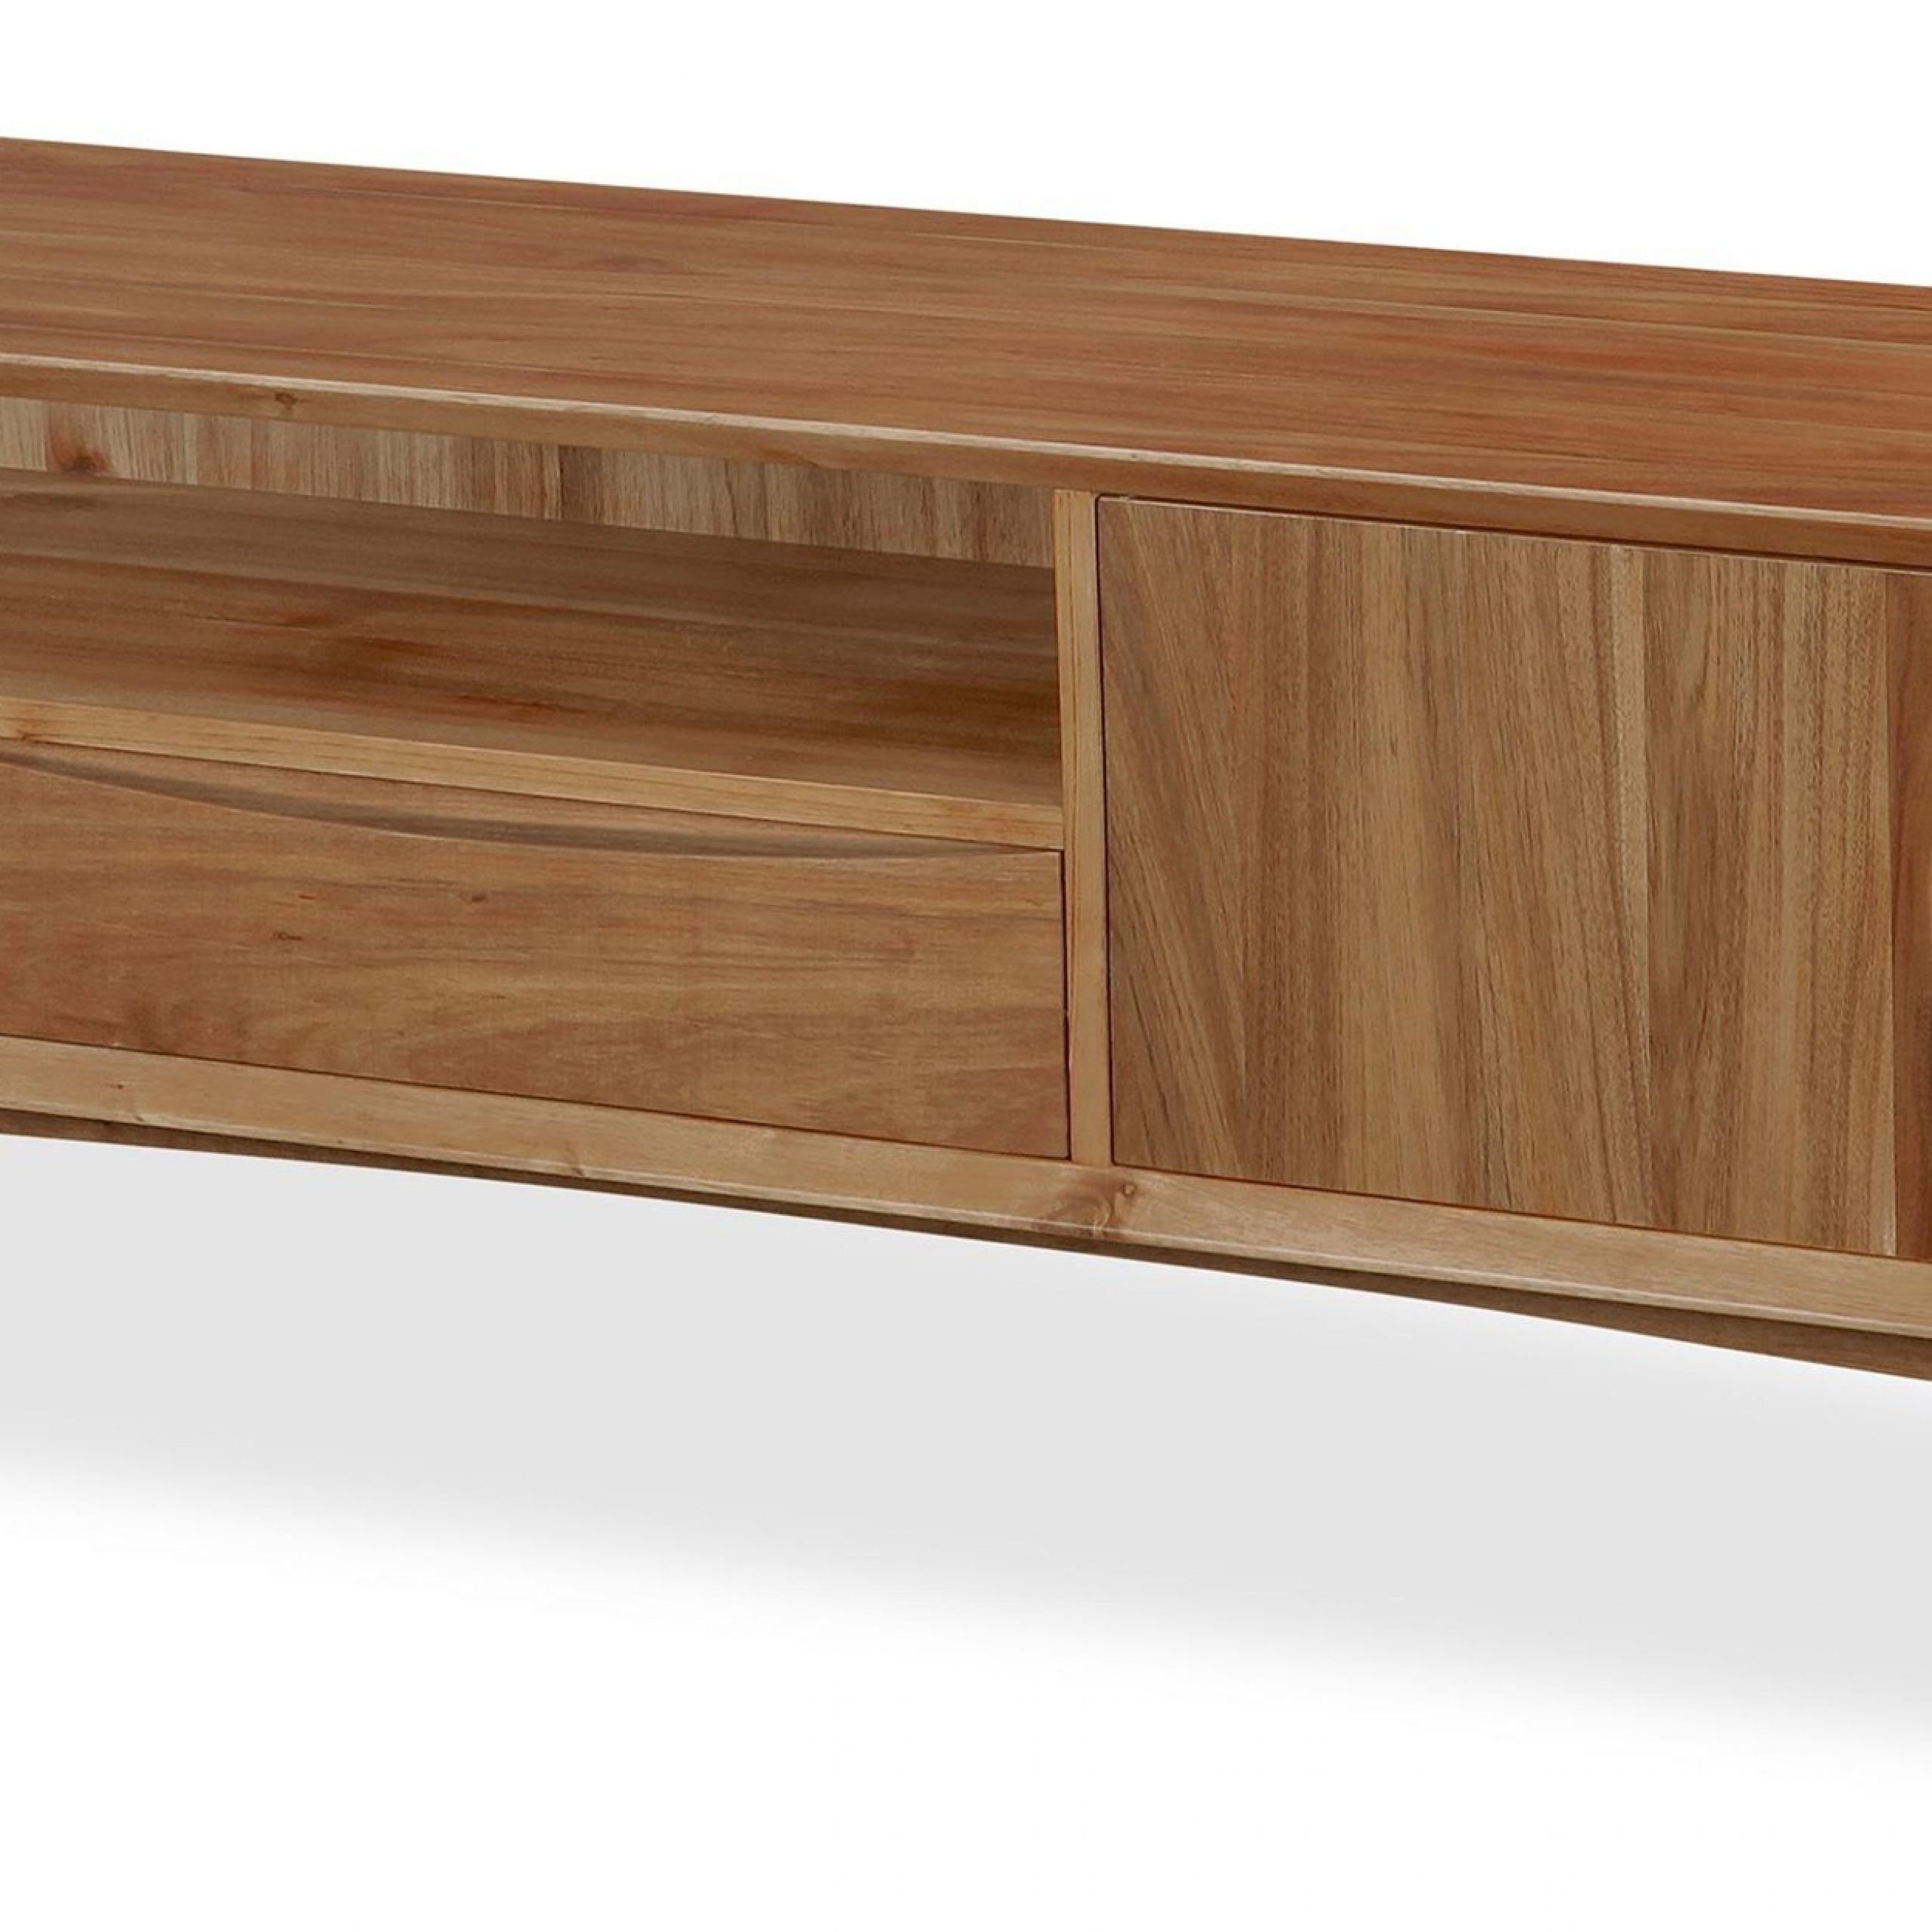 Global Home Berkeley Extra Large Tv Unit | Homeworld Throughout Chromium Extra Wide Tv Unit Stands (Gallery 8 of 20)